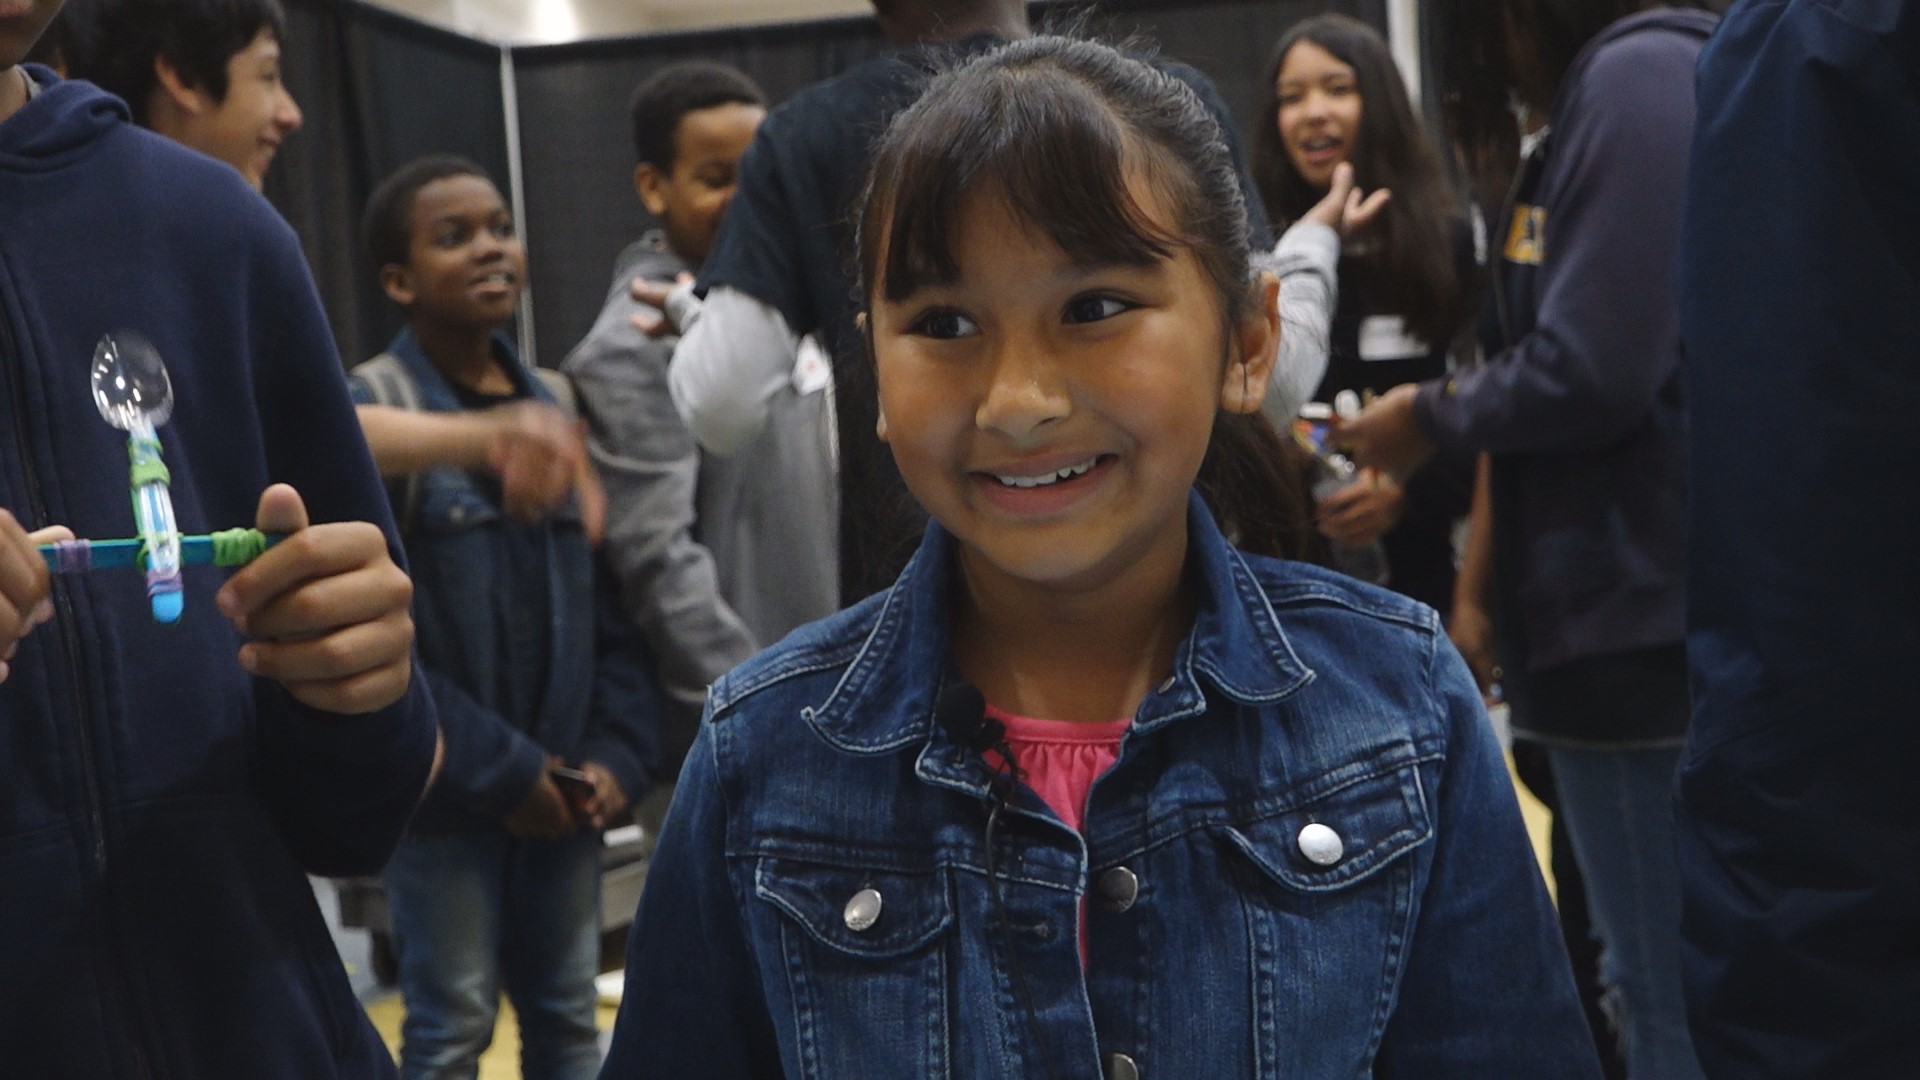 Anjali Sharma was one of many kids enjoying a STEM summit by the Square Root Academy in Sacramento. To Sharma, STEM is the best and this event helped her learn more about coding, video game design, robotics, and other STEM activities.